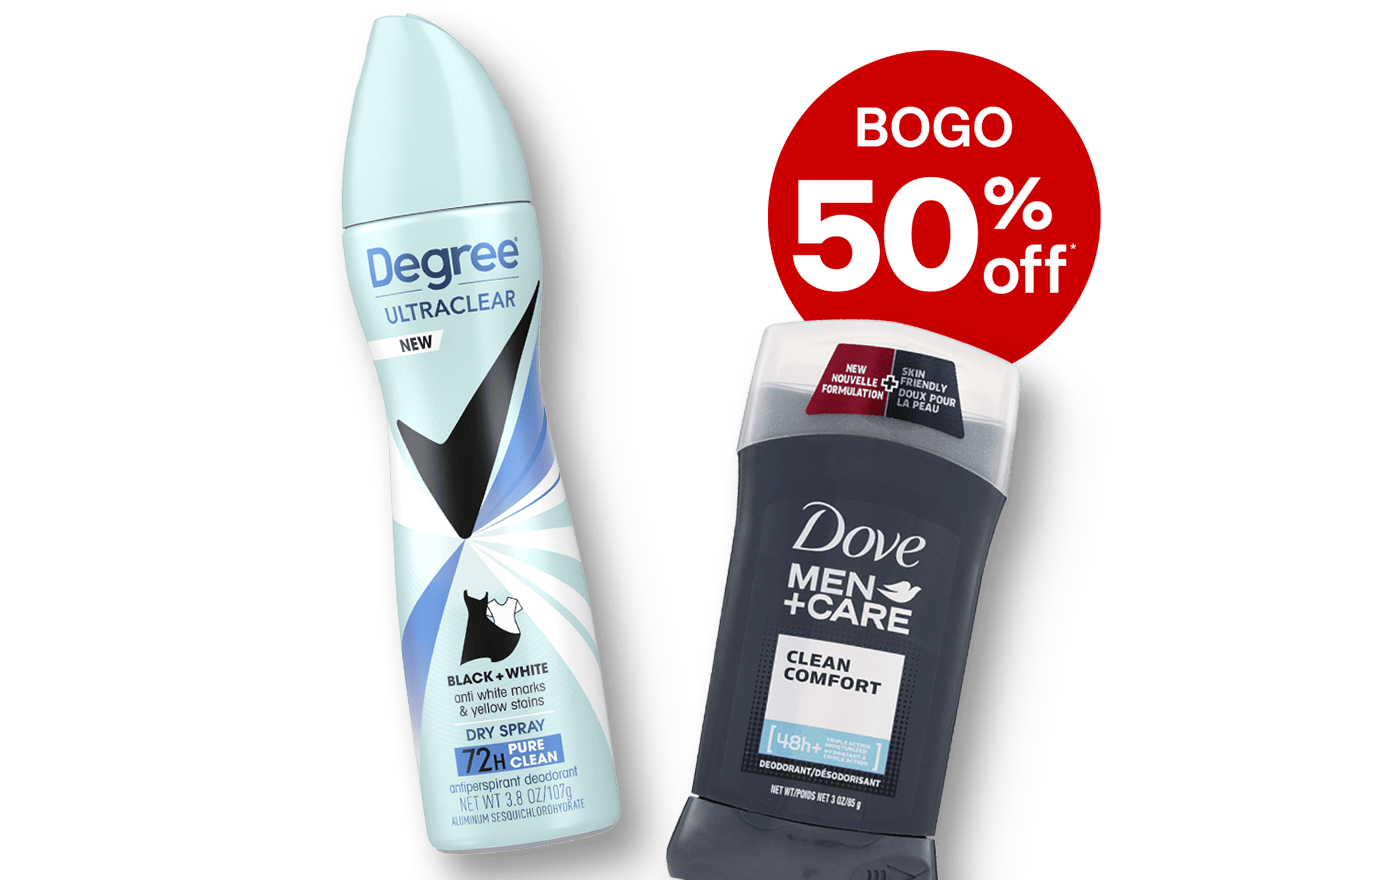 Buy one, get one 50 percent off, Degree and Dove deodorant